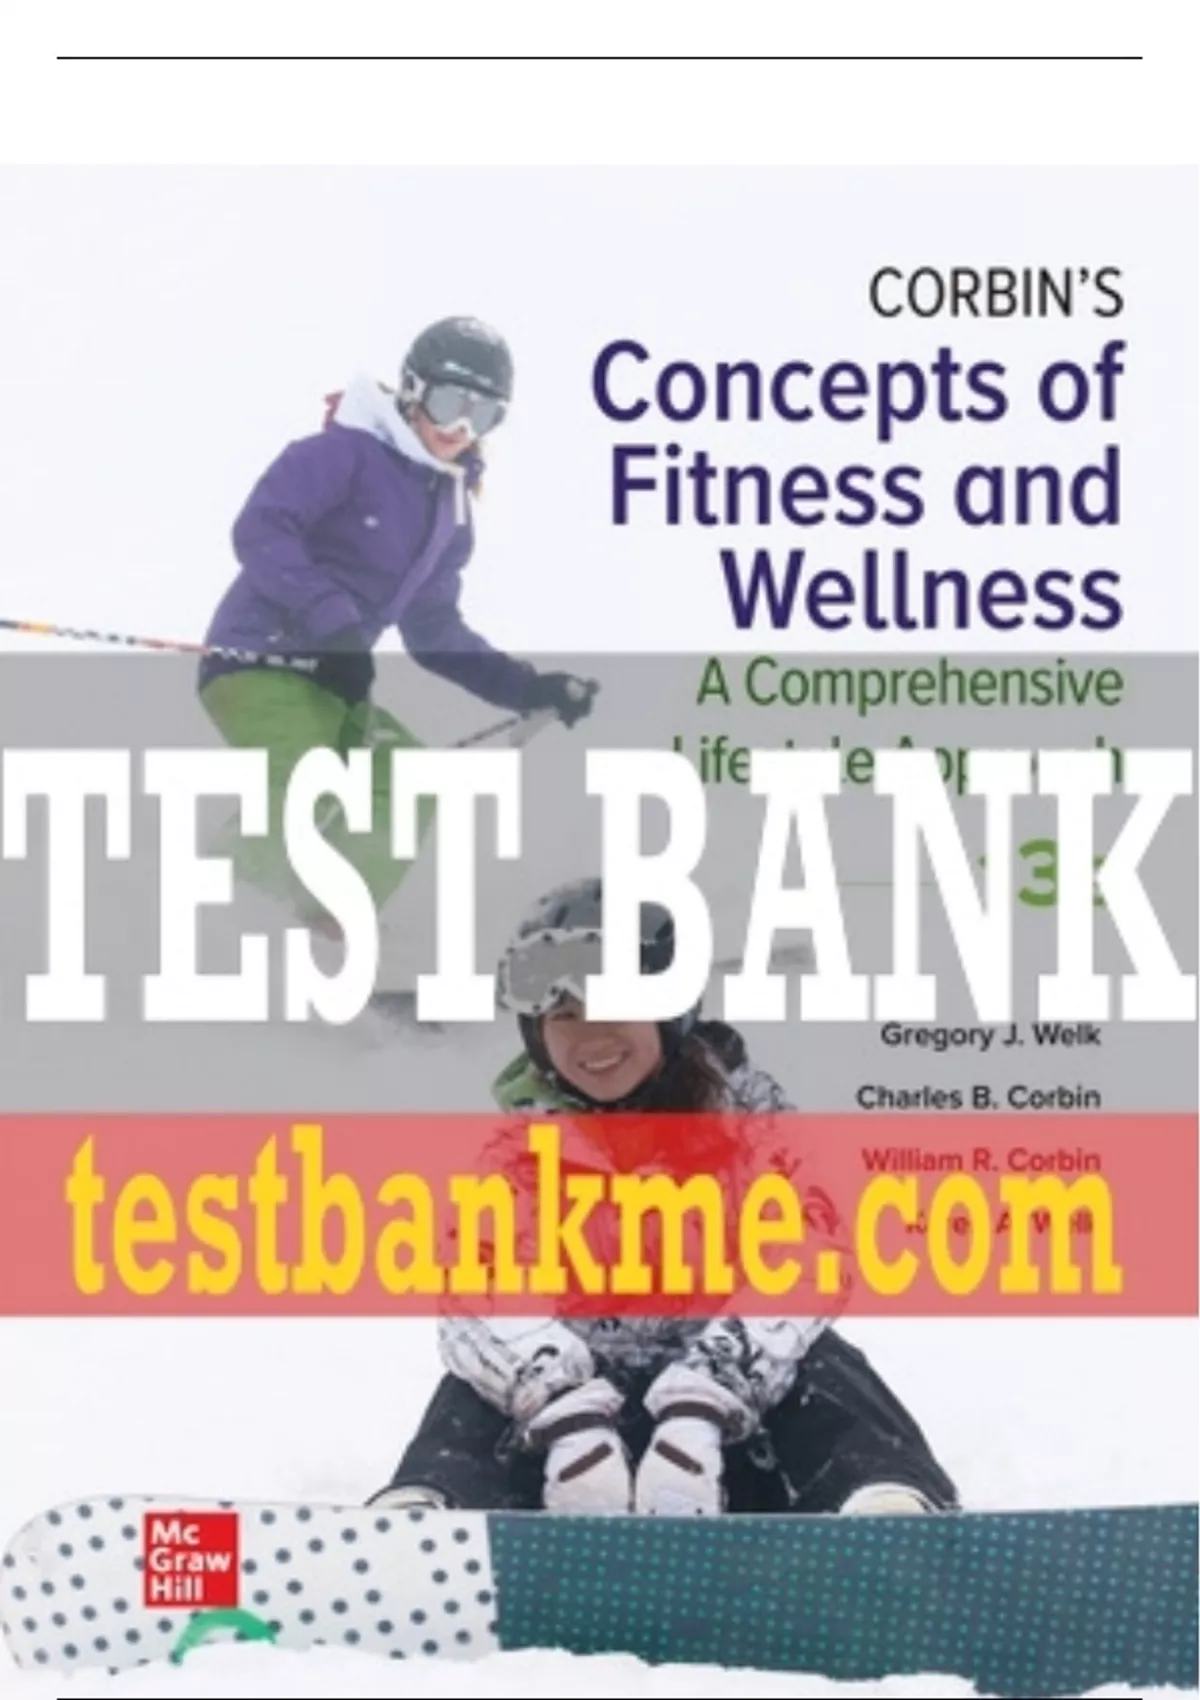 Principles and Labs For Fitness and Wellness 12th Edition Hoeger Test Bank  1, PDF, Bulimia Nervosa